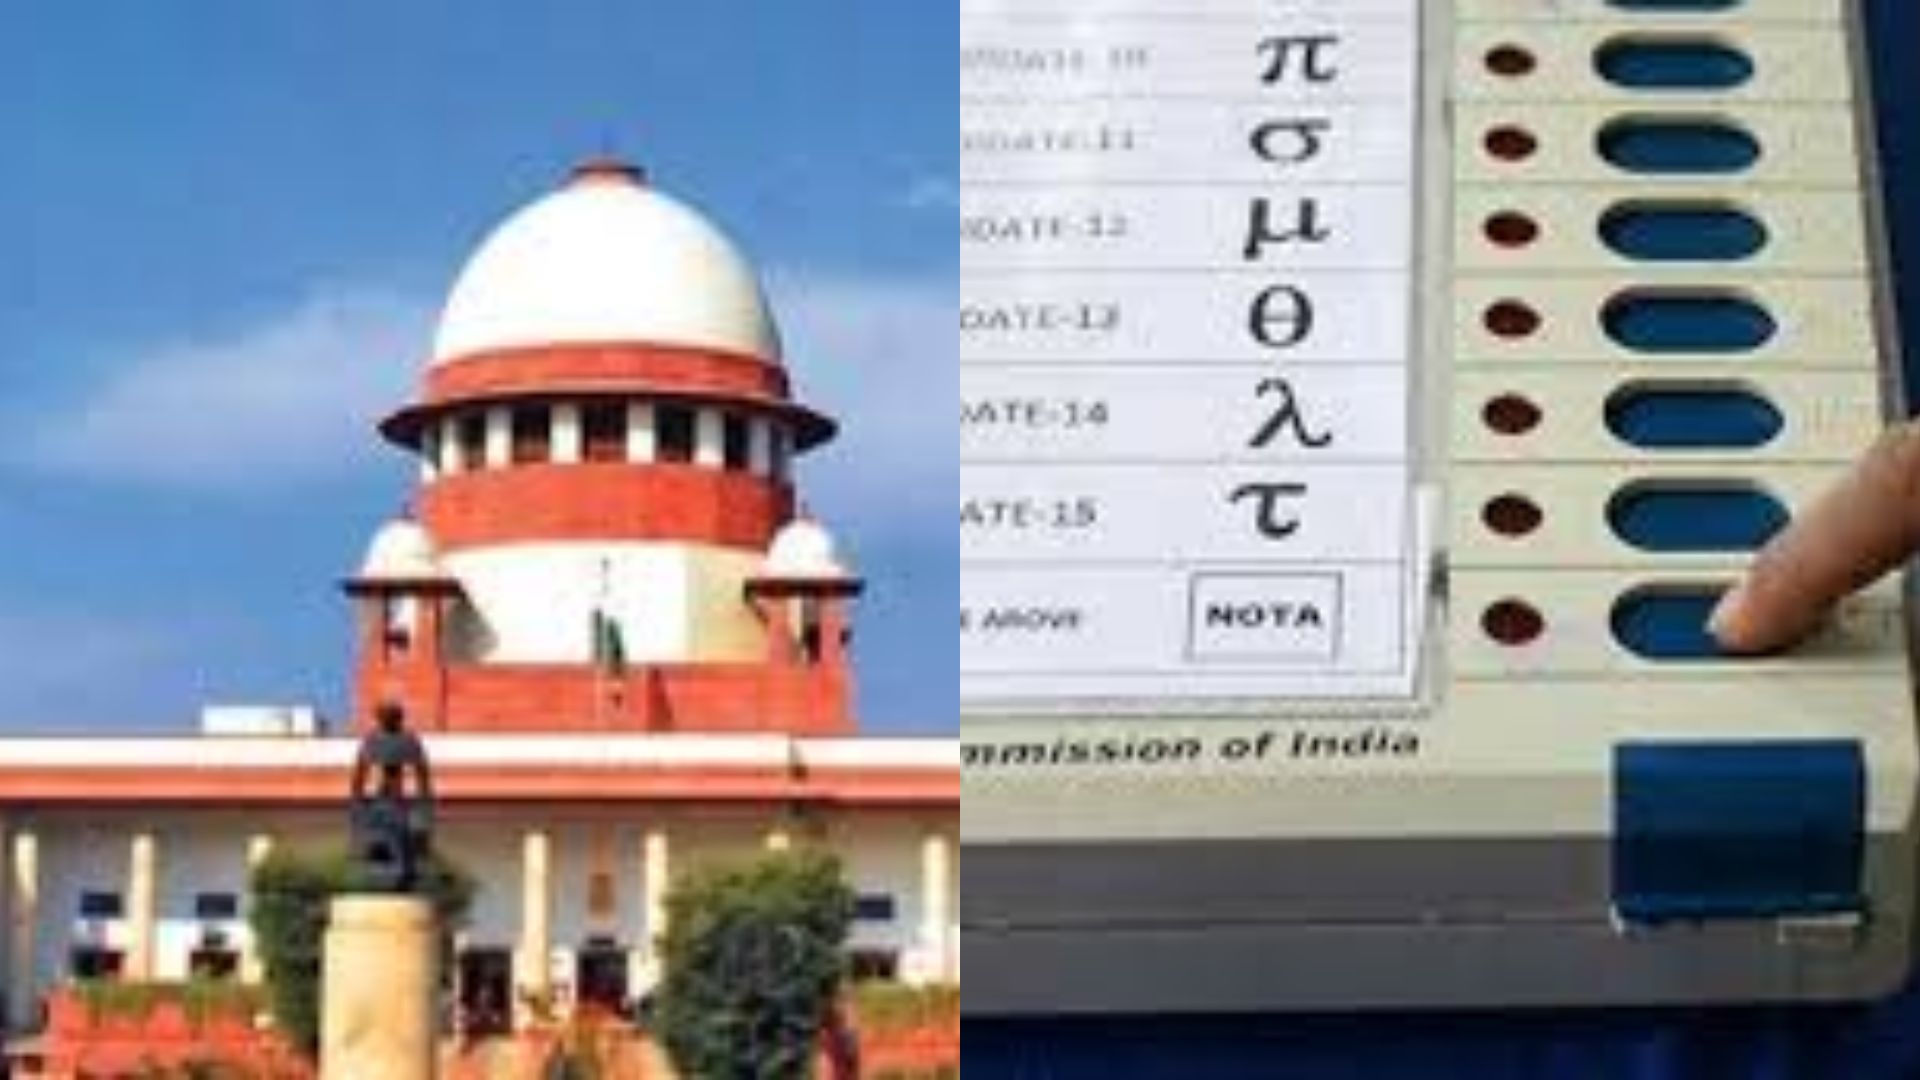 SC to hear petition for 100% votes verification